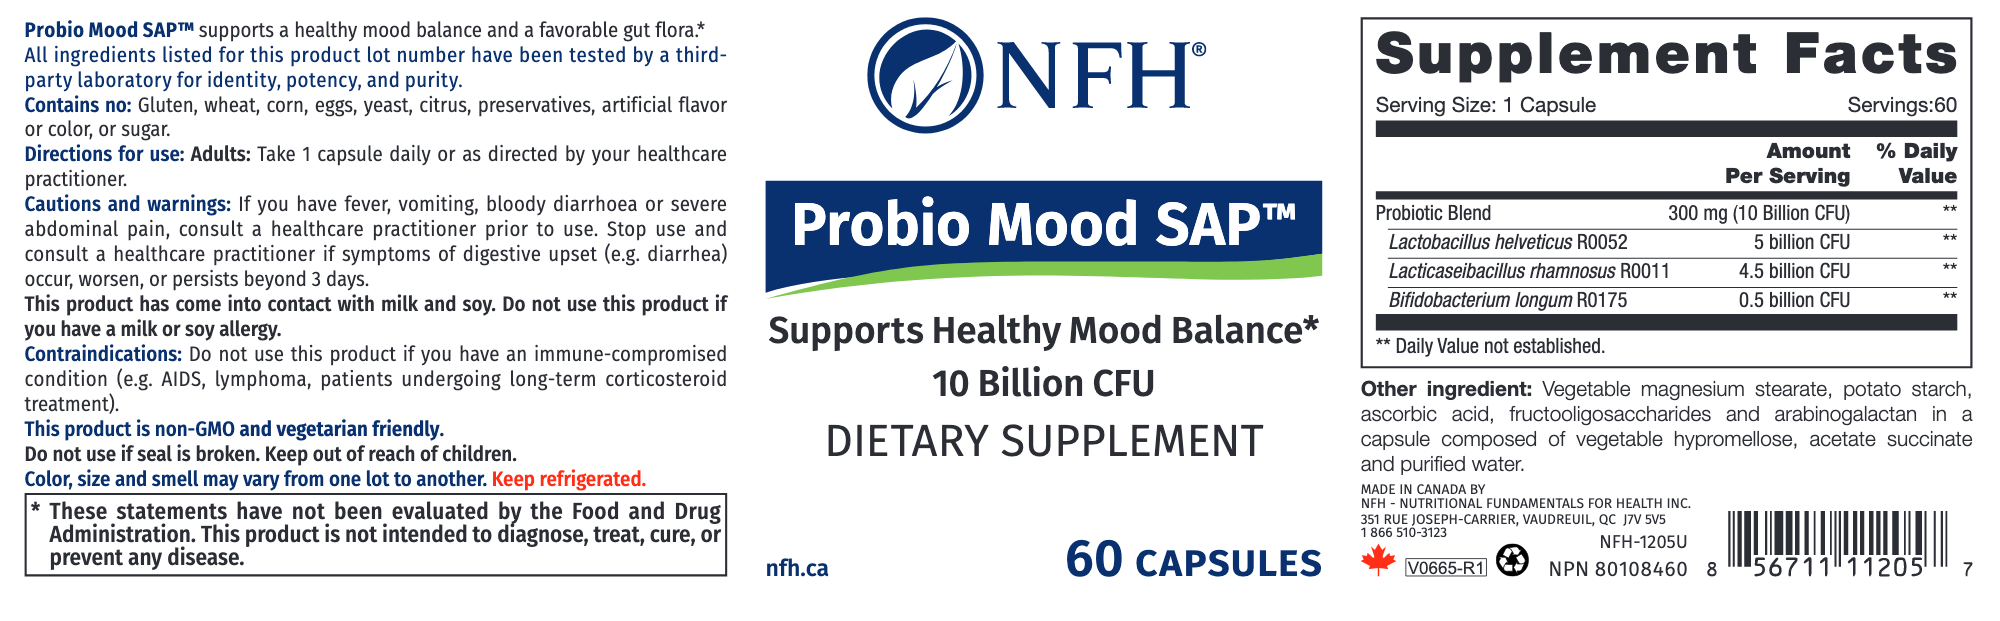 Probio Mood SAP (60 Capsules)-Vitamins & Supplements-Nutritional Fundamentals for Health (NFH)-Pine Street Clinic